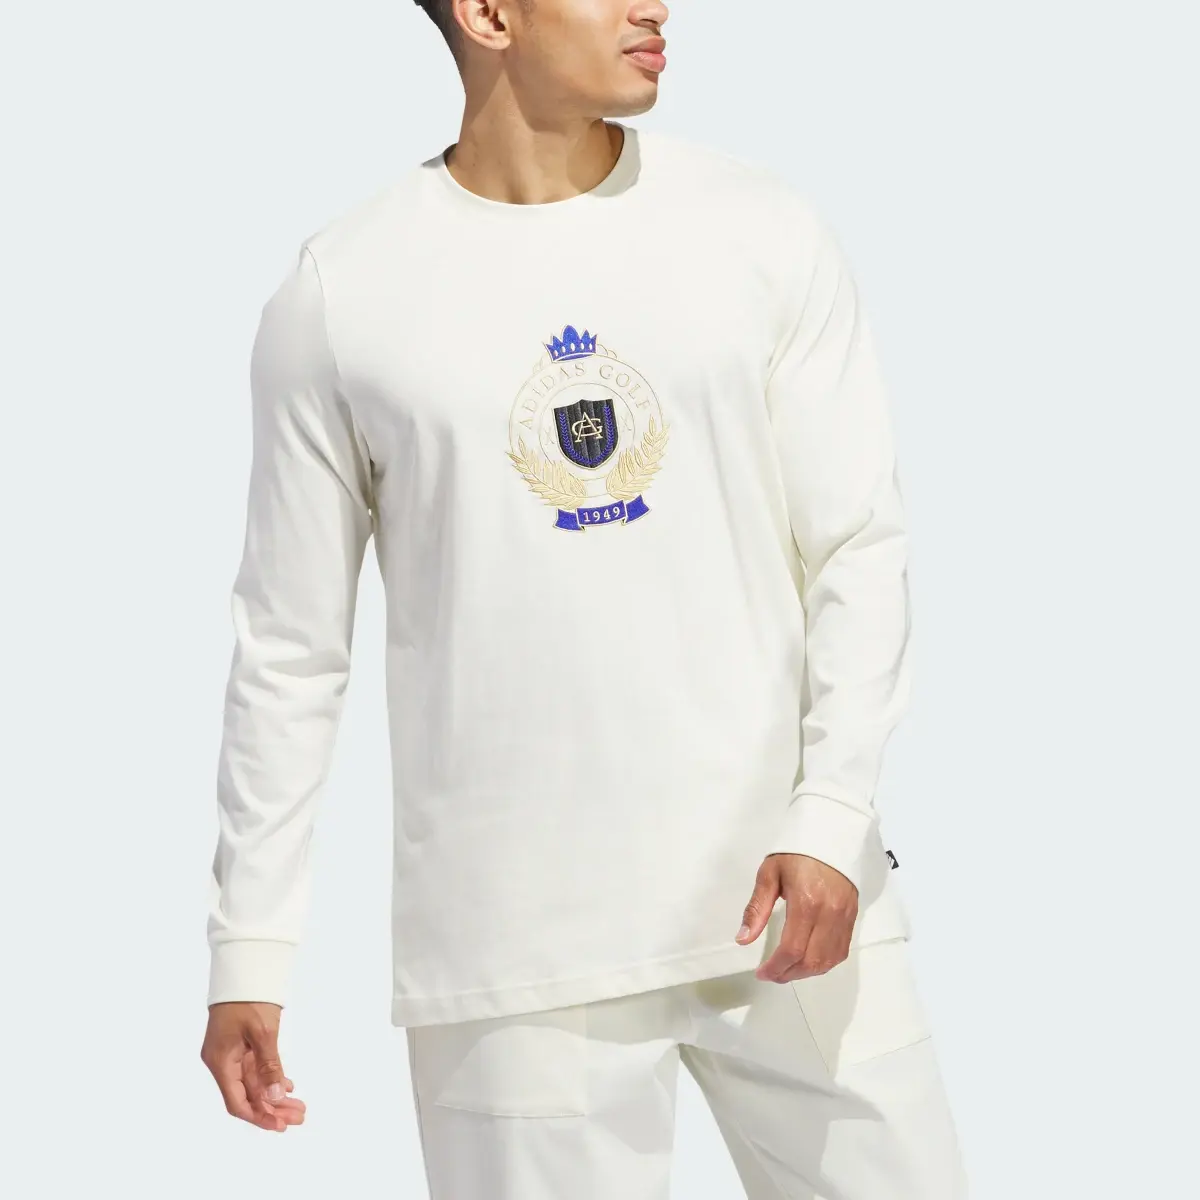 Adidas Go-To Crest Graphic Long Sleeve T-Shirt. 1